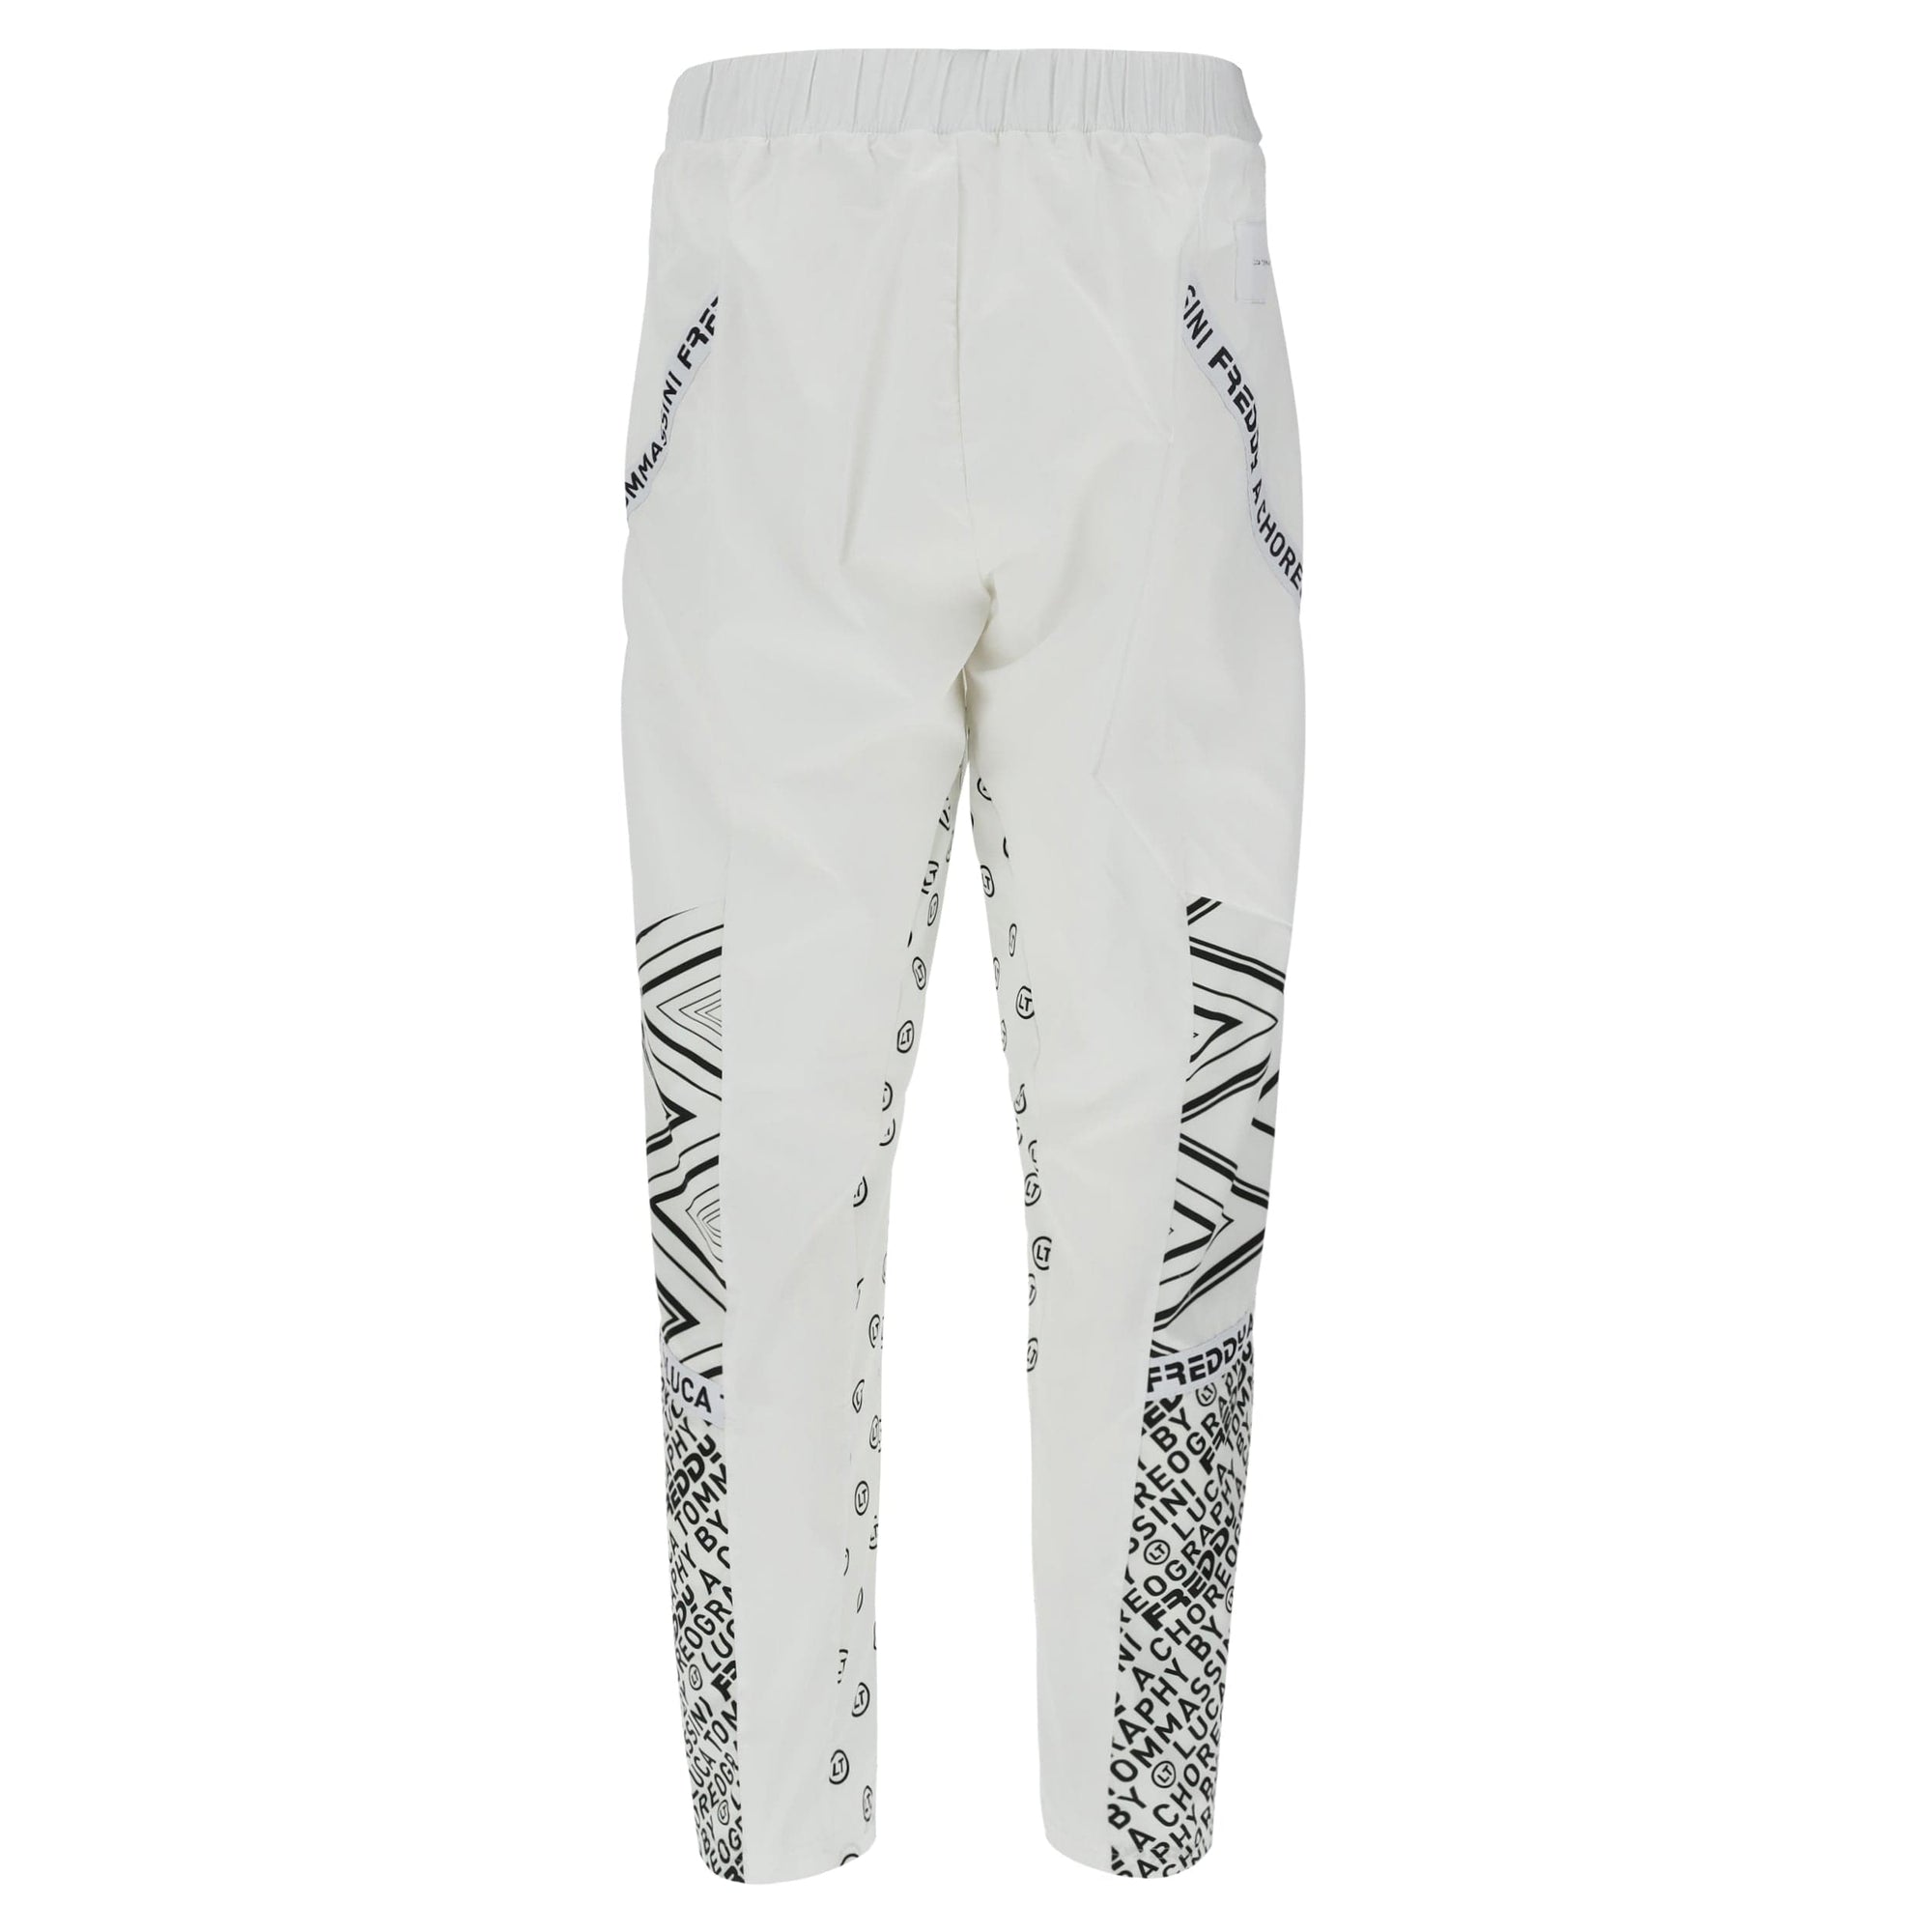 Trousers unisex with pattern print - A Choreography by Luca Tommassini - White 3